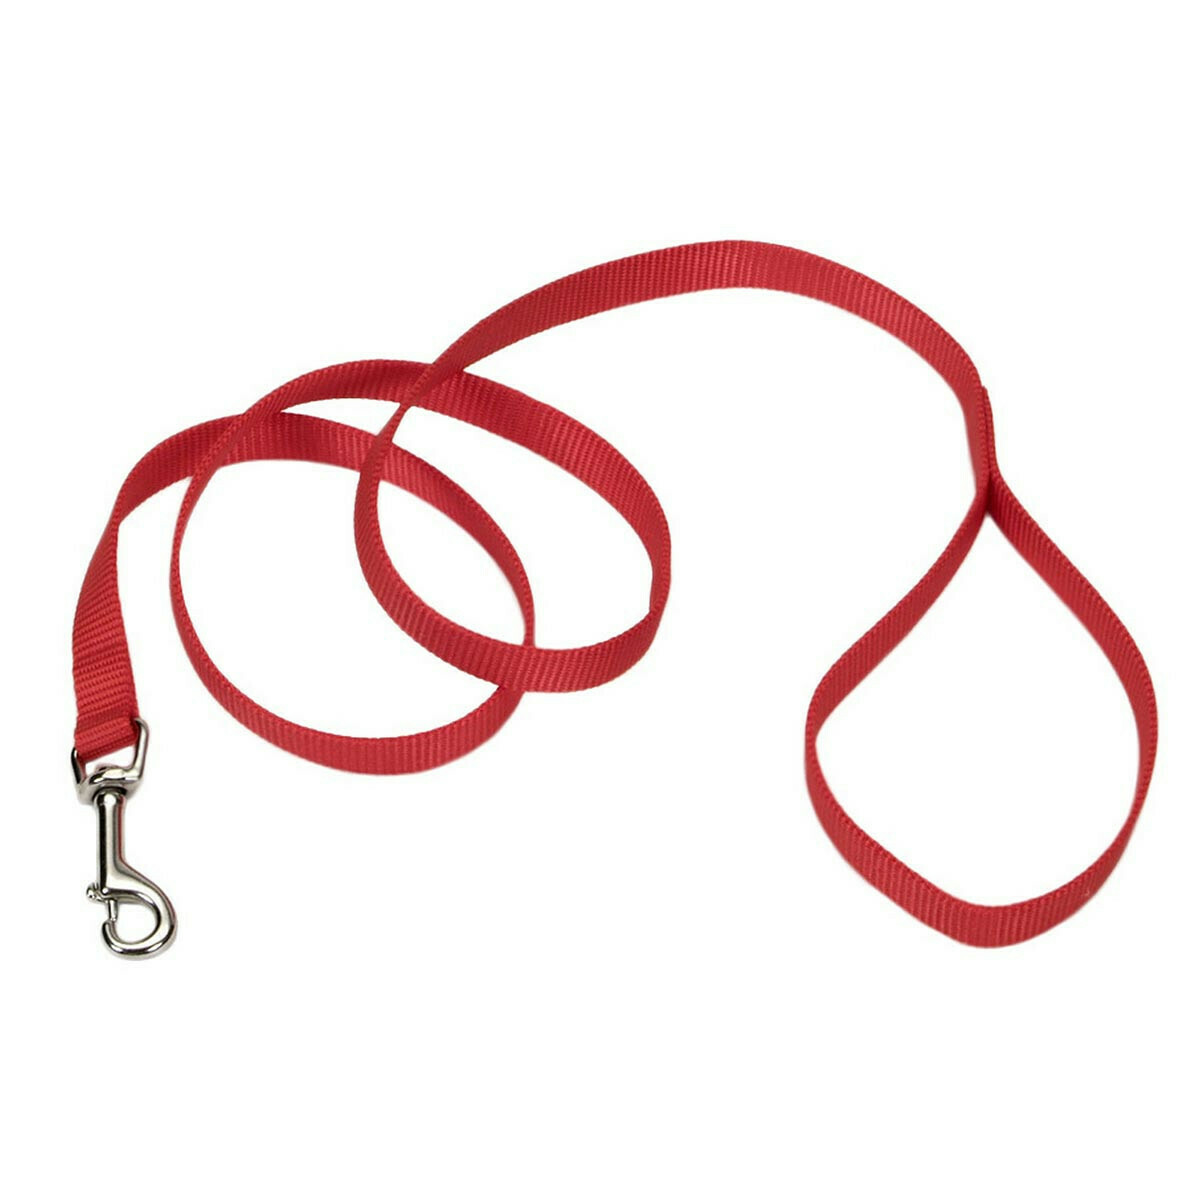 RED LEASH 4'